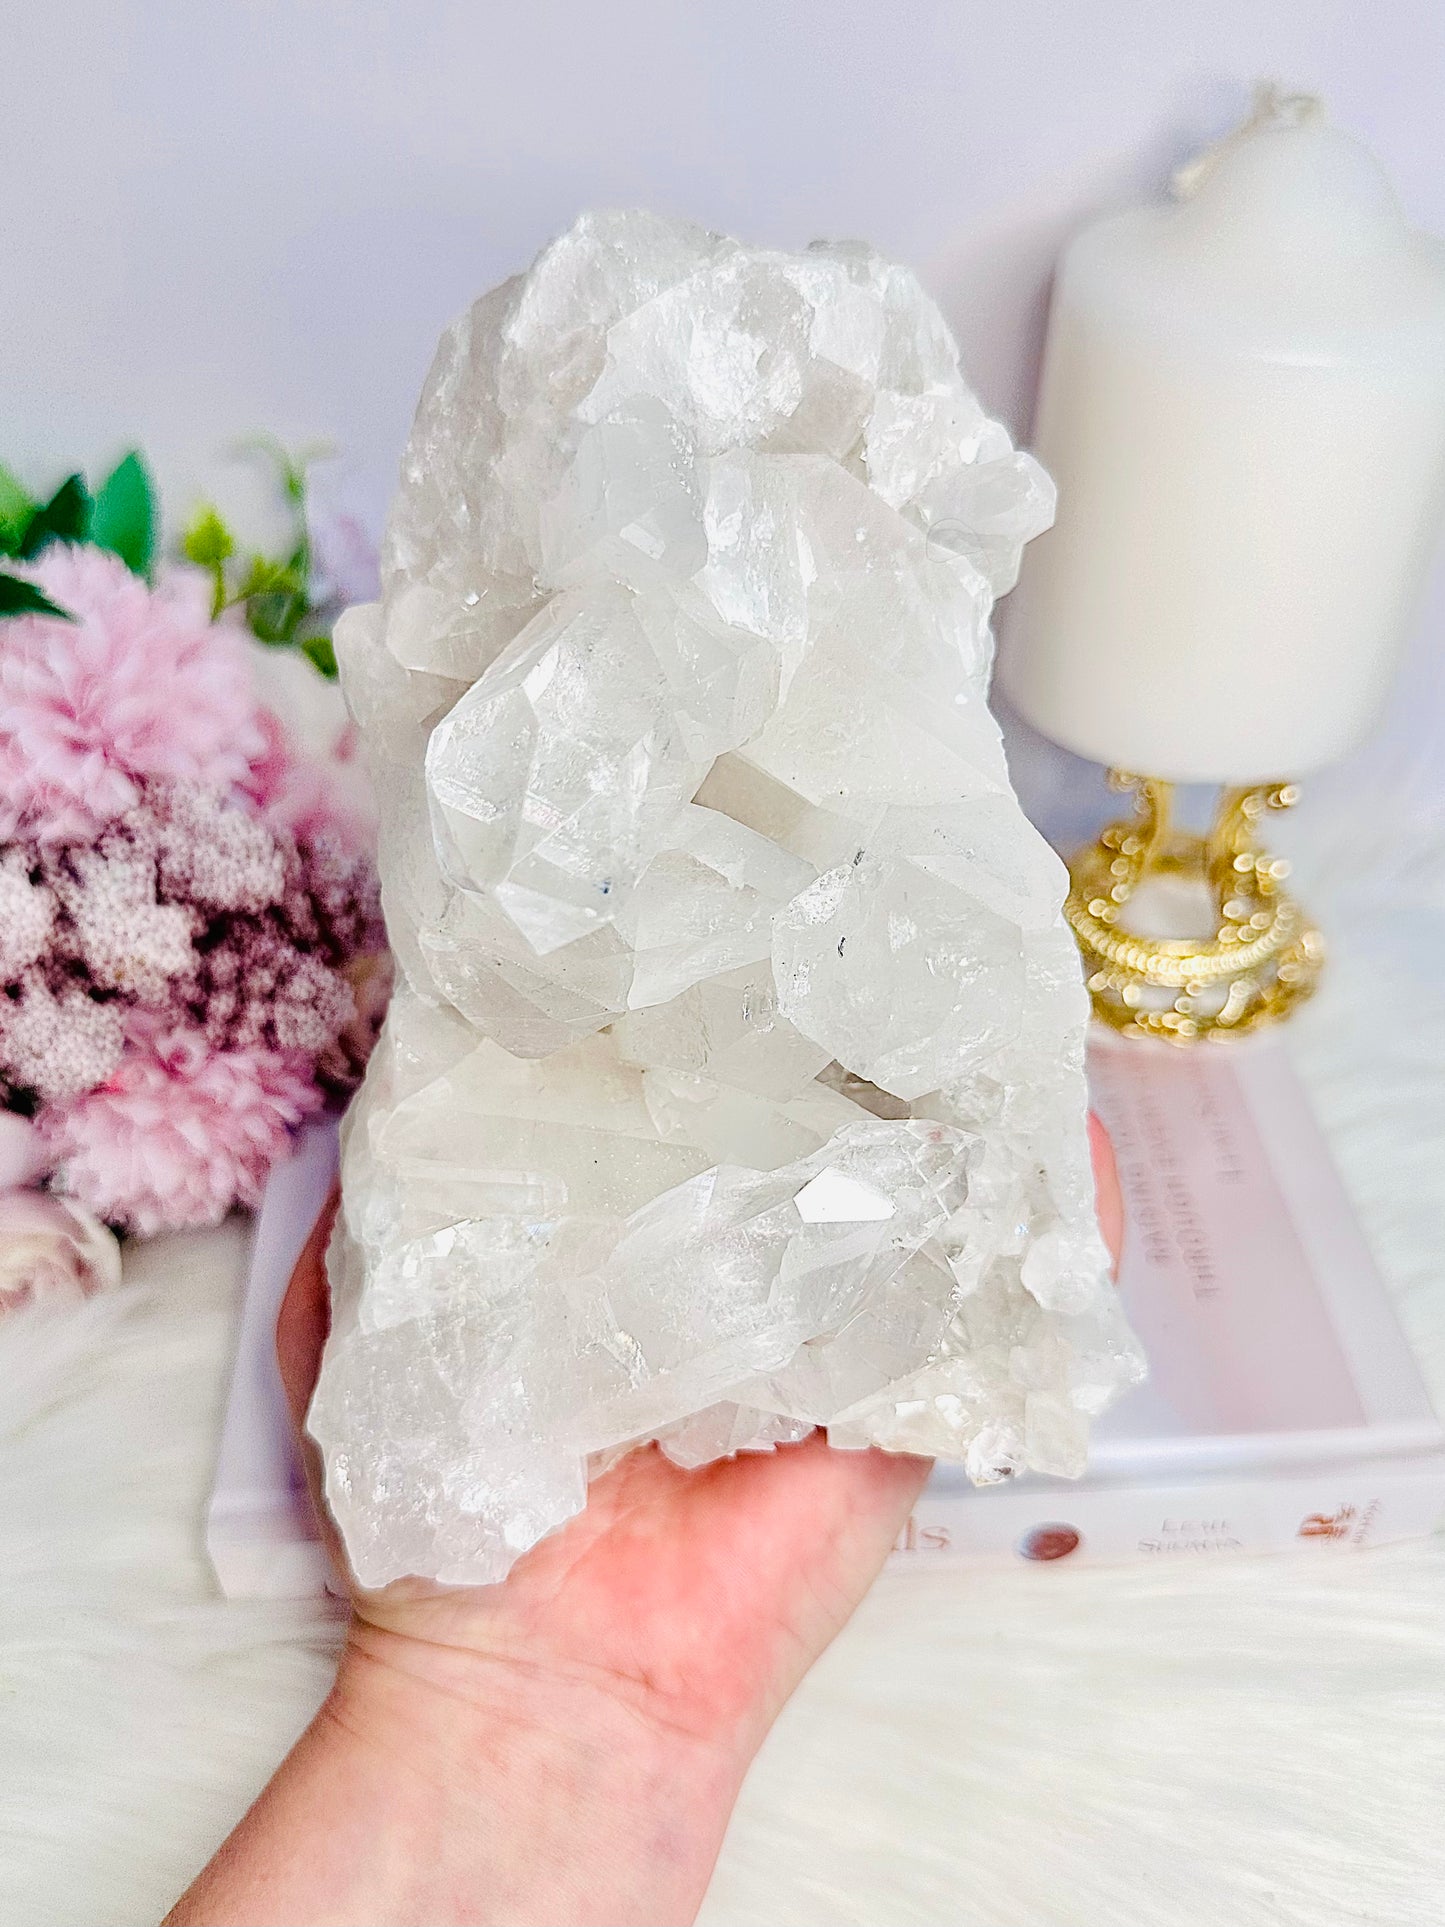 Wow!!!! Absolutely Beautiful Large High Grade Clear Quartz Free Standing Cluster 16cm 1.19KG From Brazil